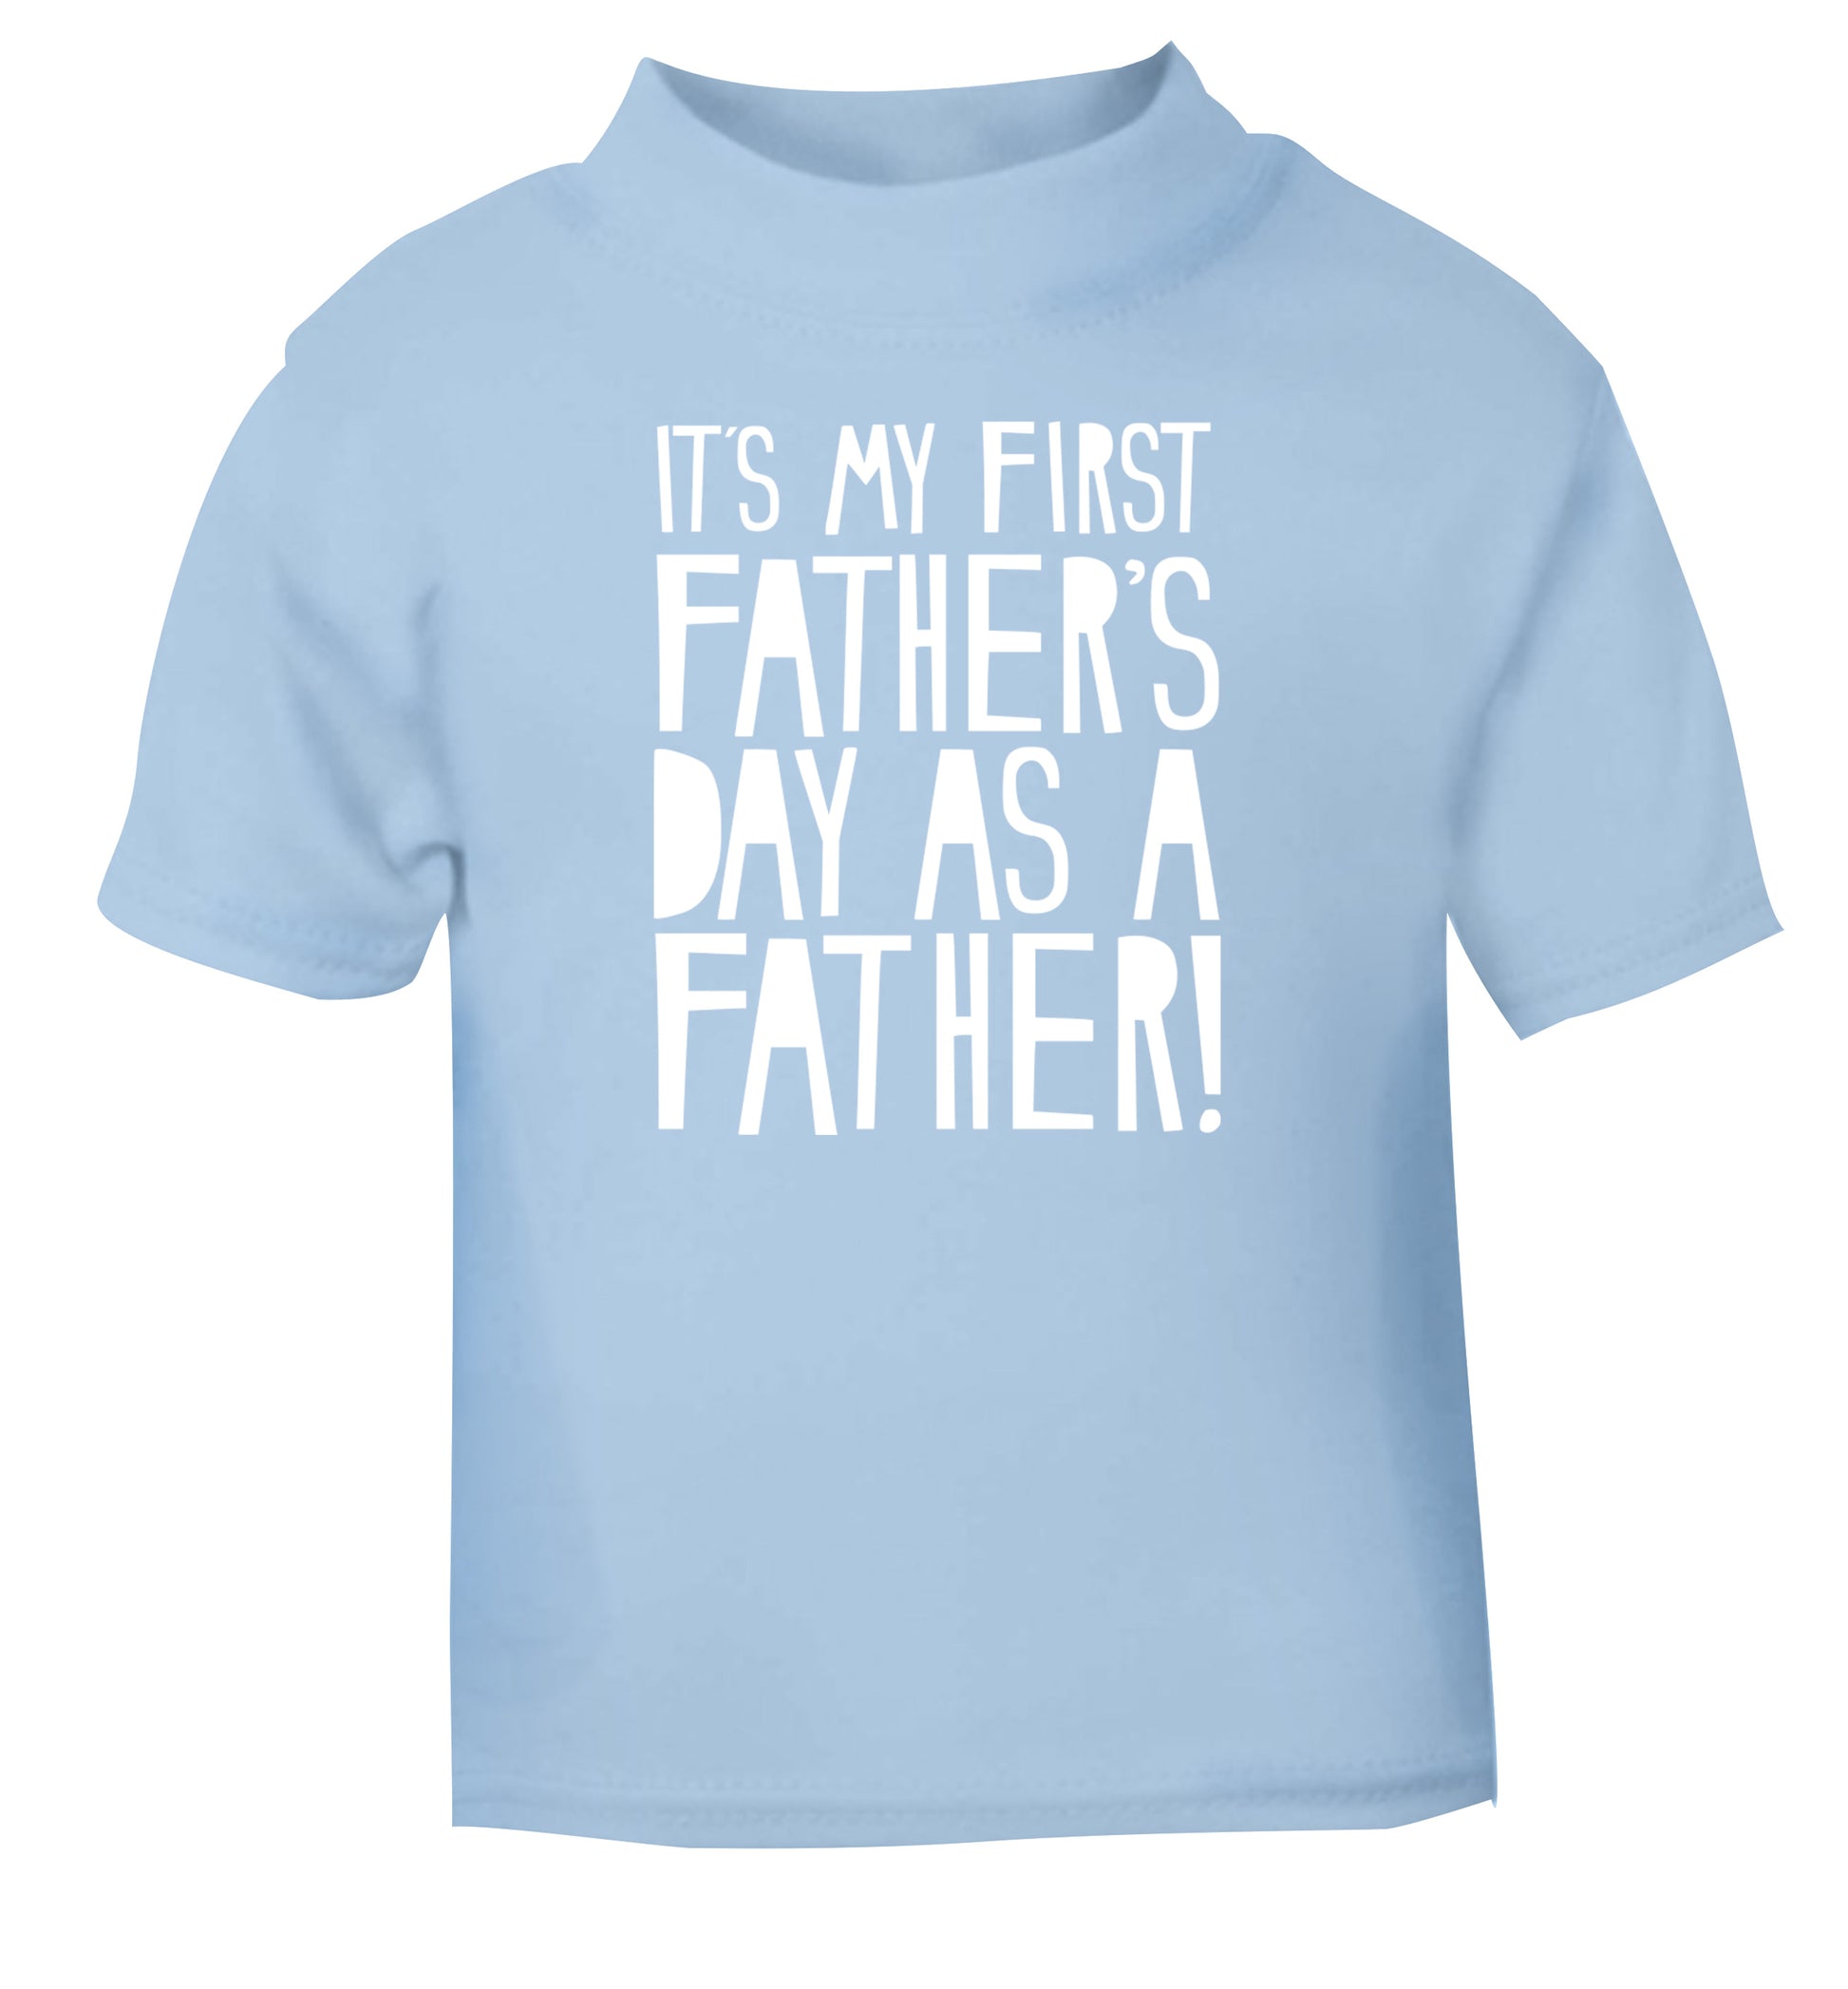 It's my first Father's Day as a father! light blue Baby Toddler Tshirt 2 Years